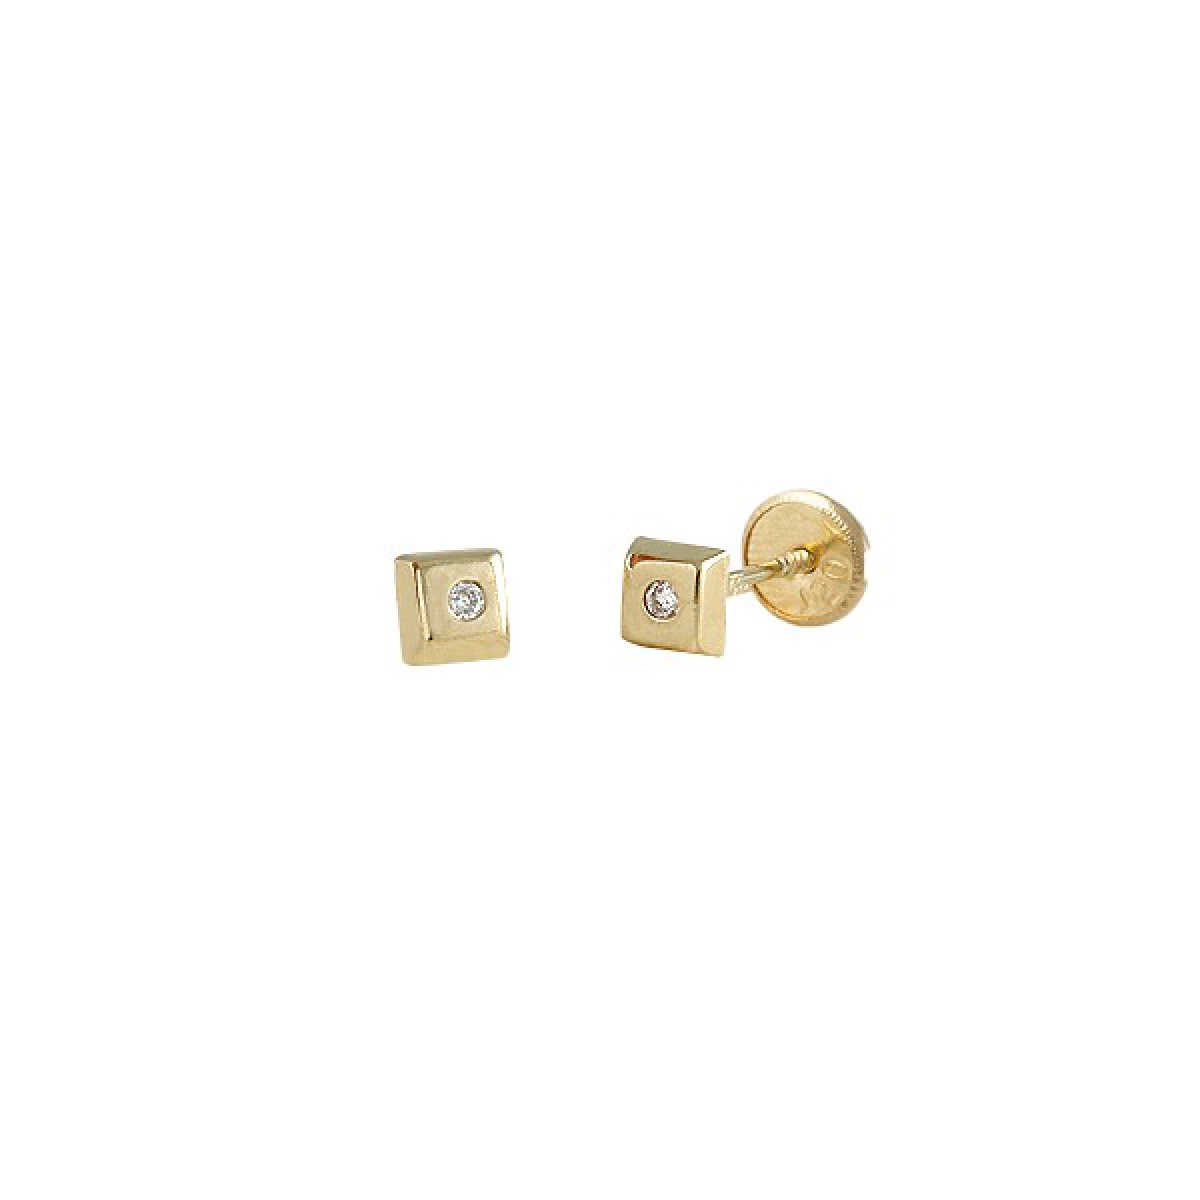 EARRINGS BABY LAW 18 K GOLD YELLOW WITH BRILLIANT 446443 O / Karammelo 446443 o/a